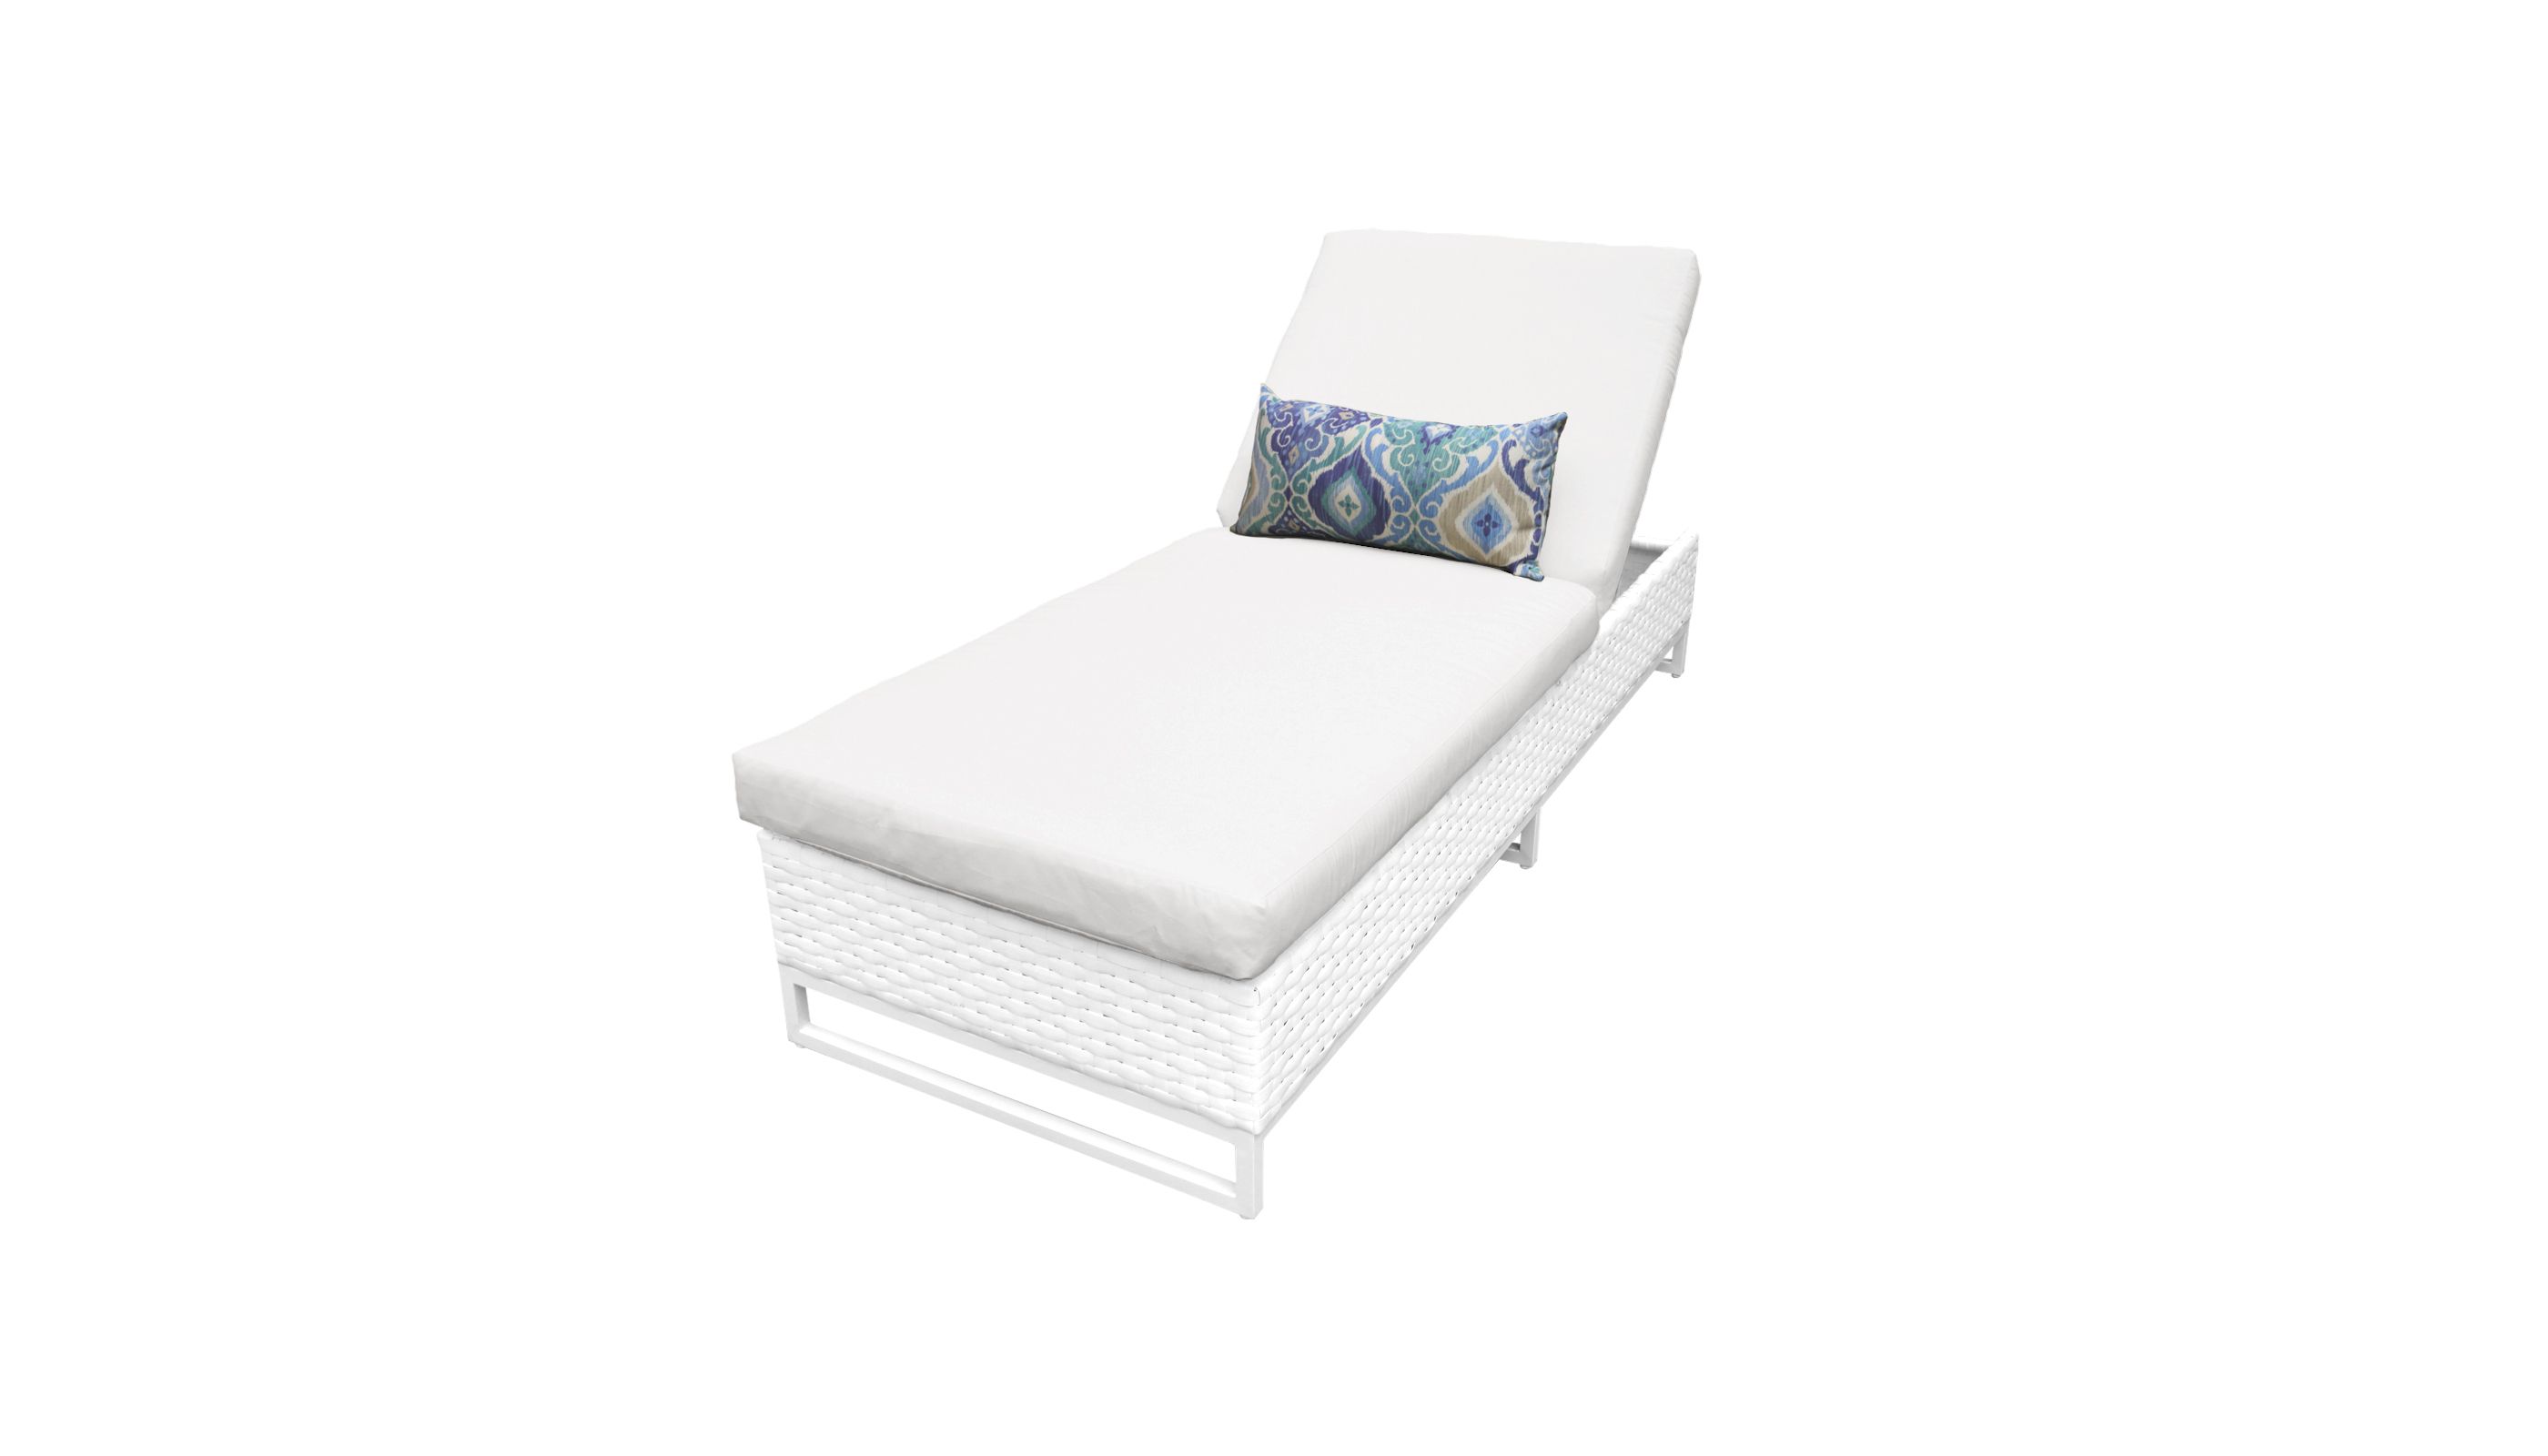 Preferred Pearl Bay Chaise Outdoor Wicker Patio Furniture Within Pearl Chaise Lounges (View 23 of 25)